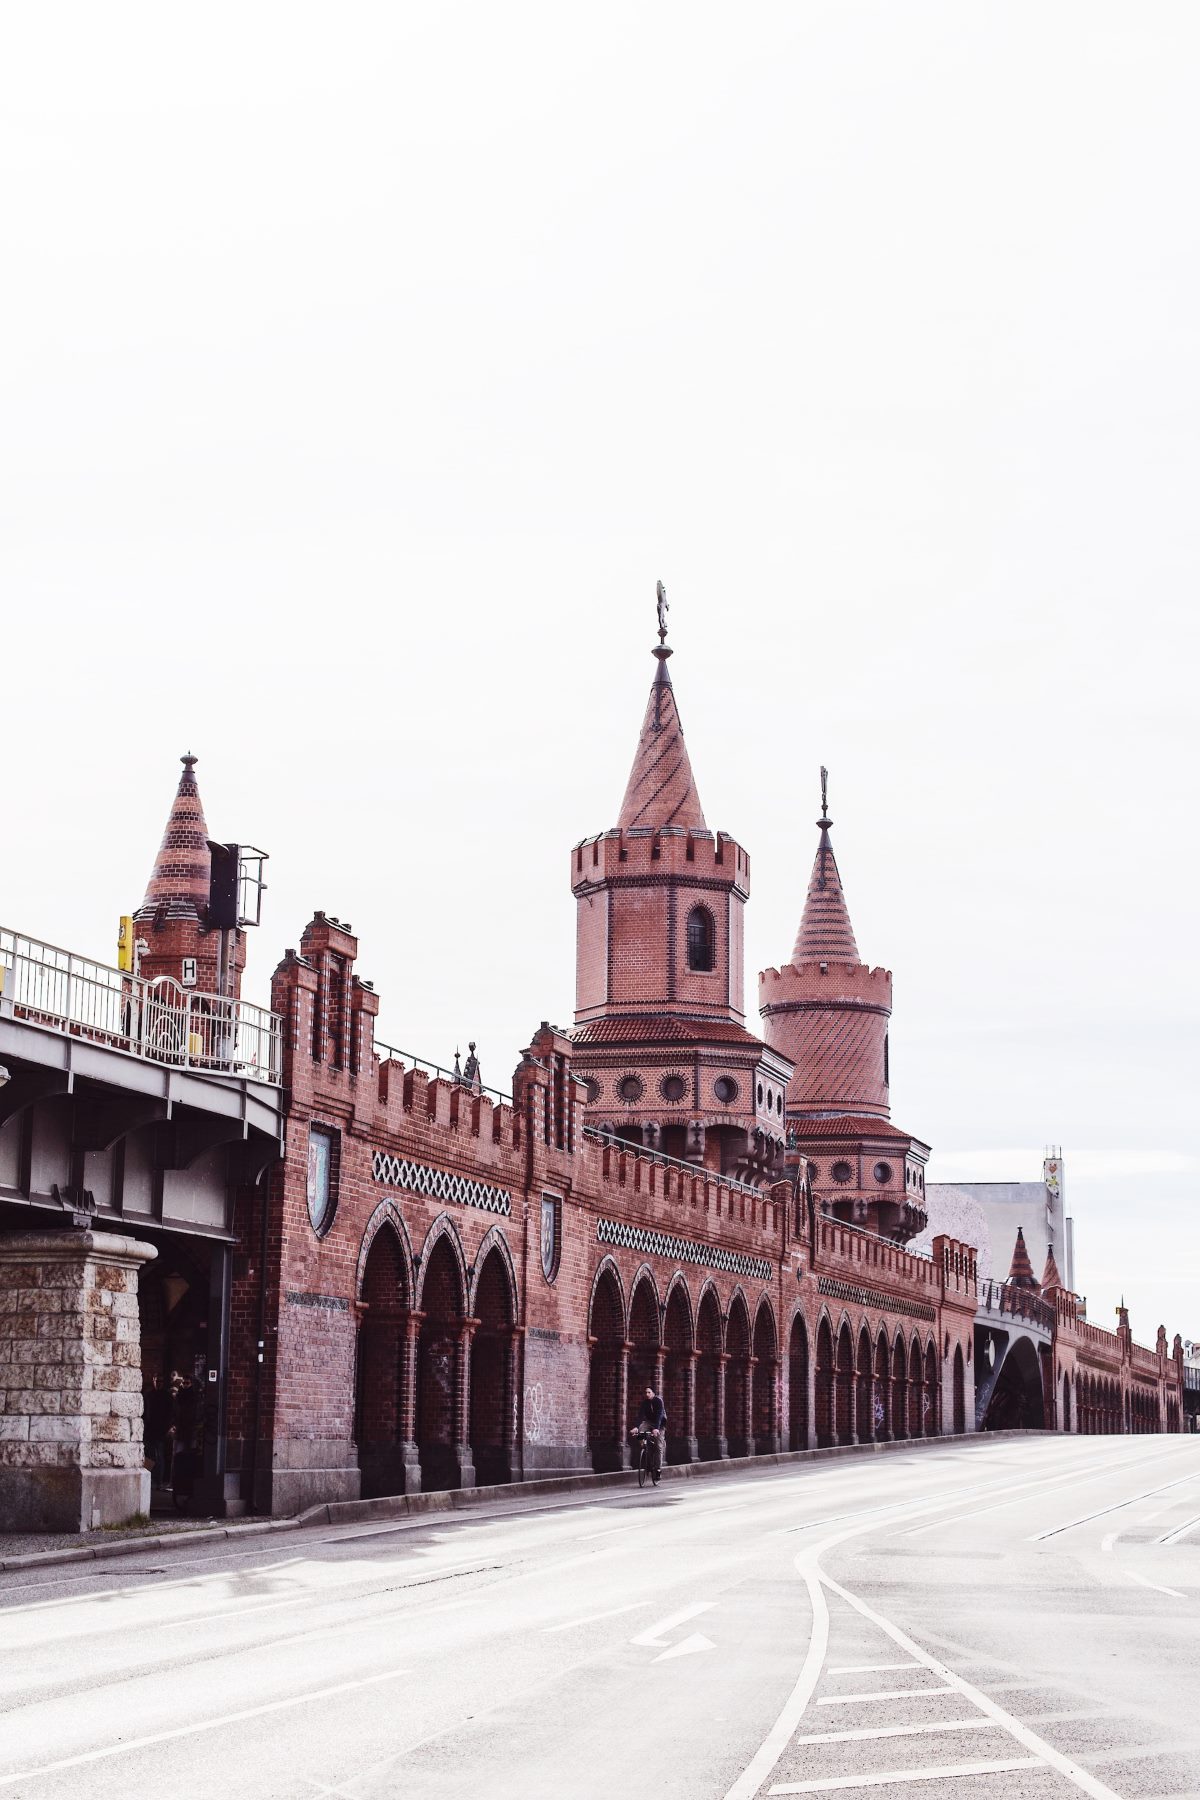 What Can You Discover About Berlin’s Cold War History on a Walking Tour?